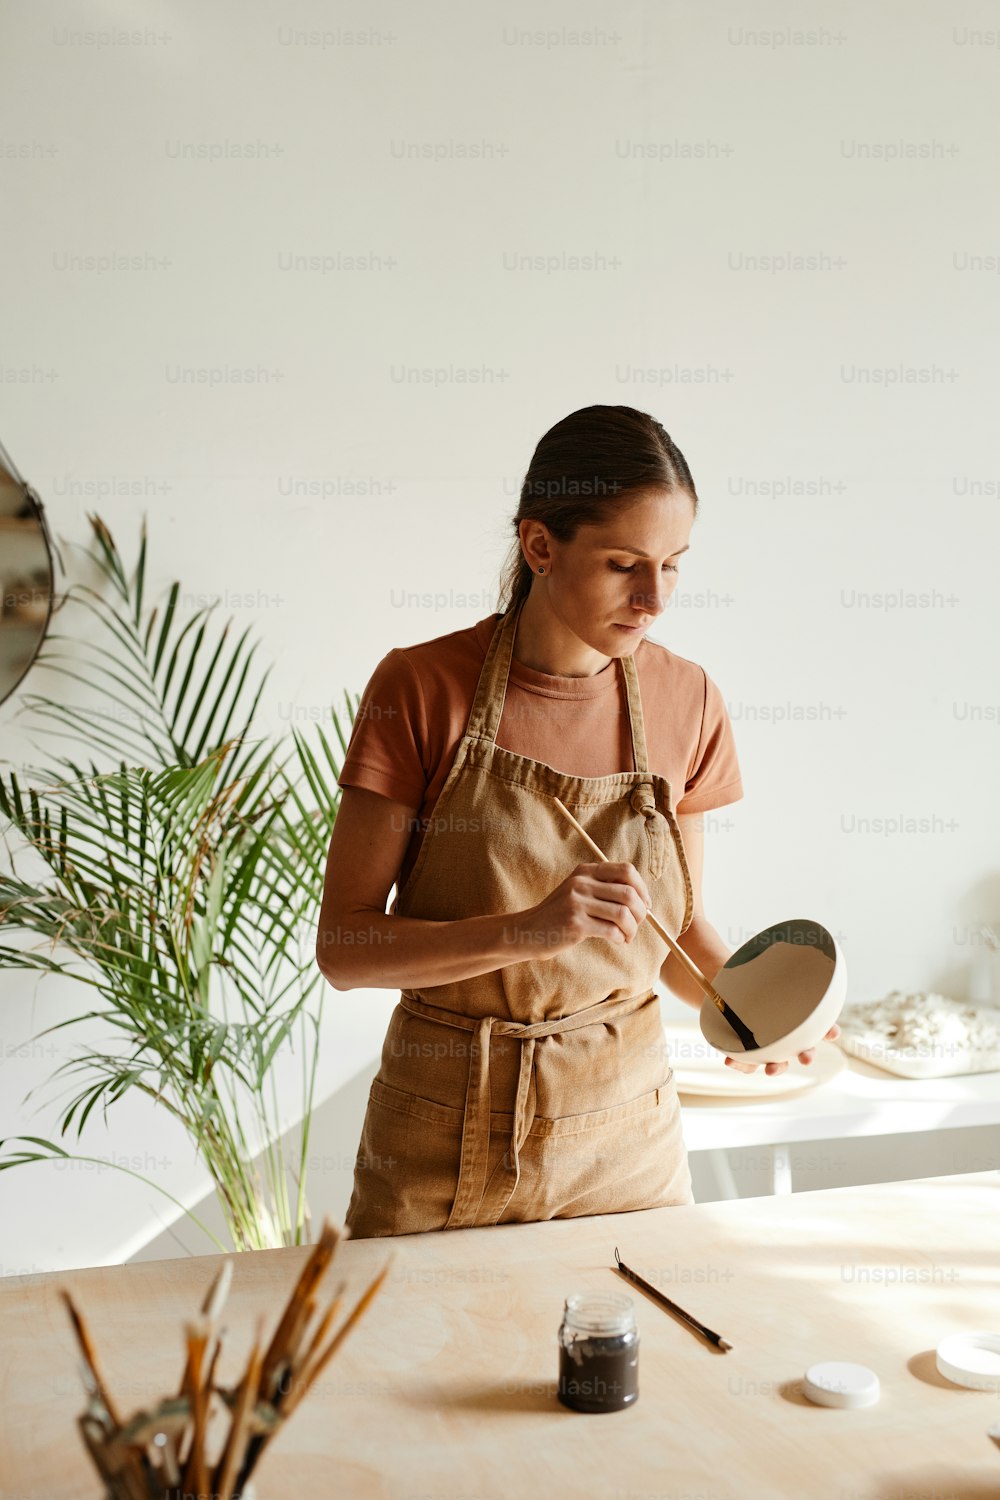 Minimal portrait of young female artist decorating ceramics in pottery workshop, copy space